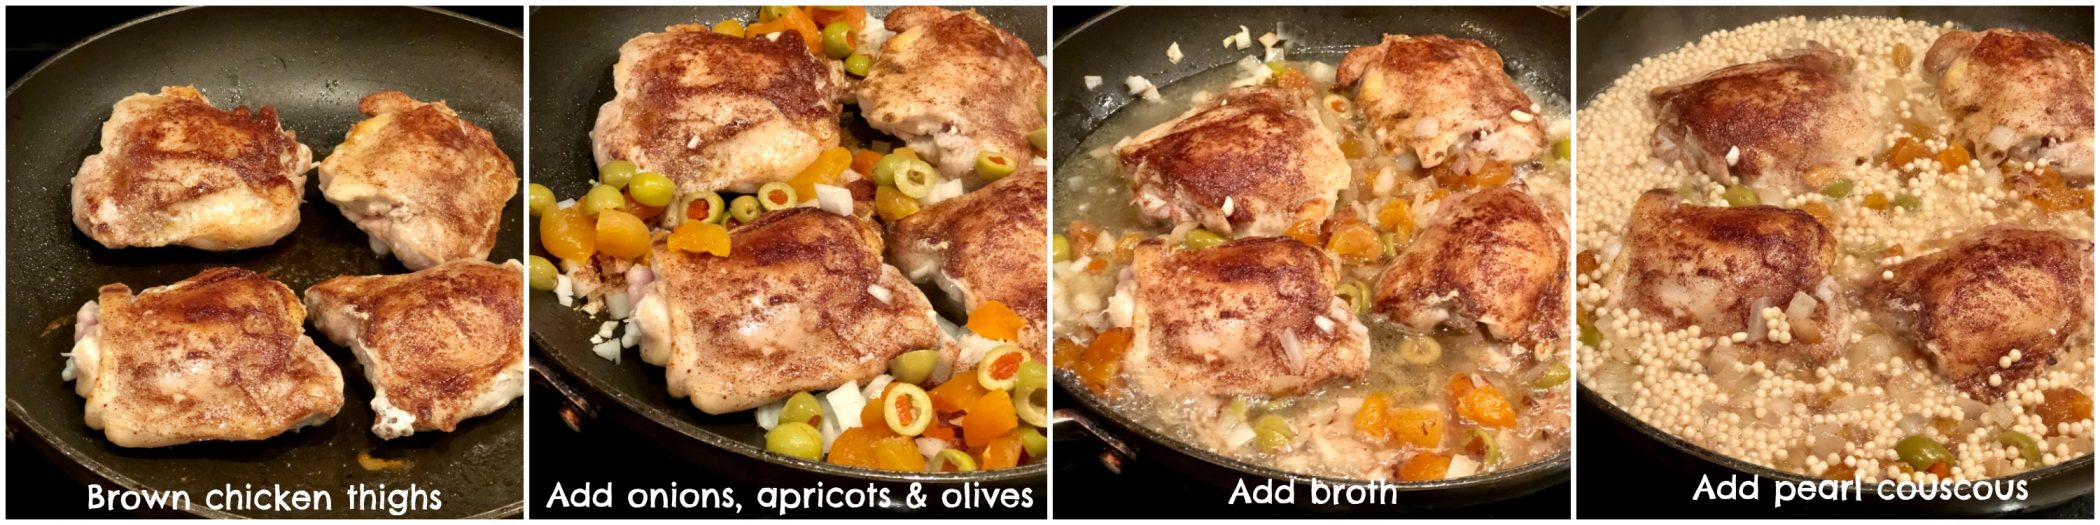 One Pot chicken with Apricots step by step